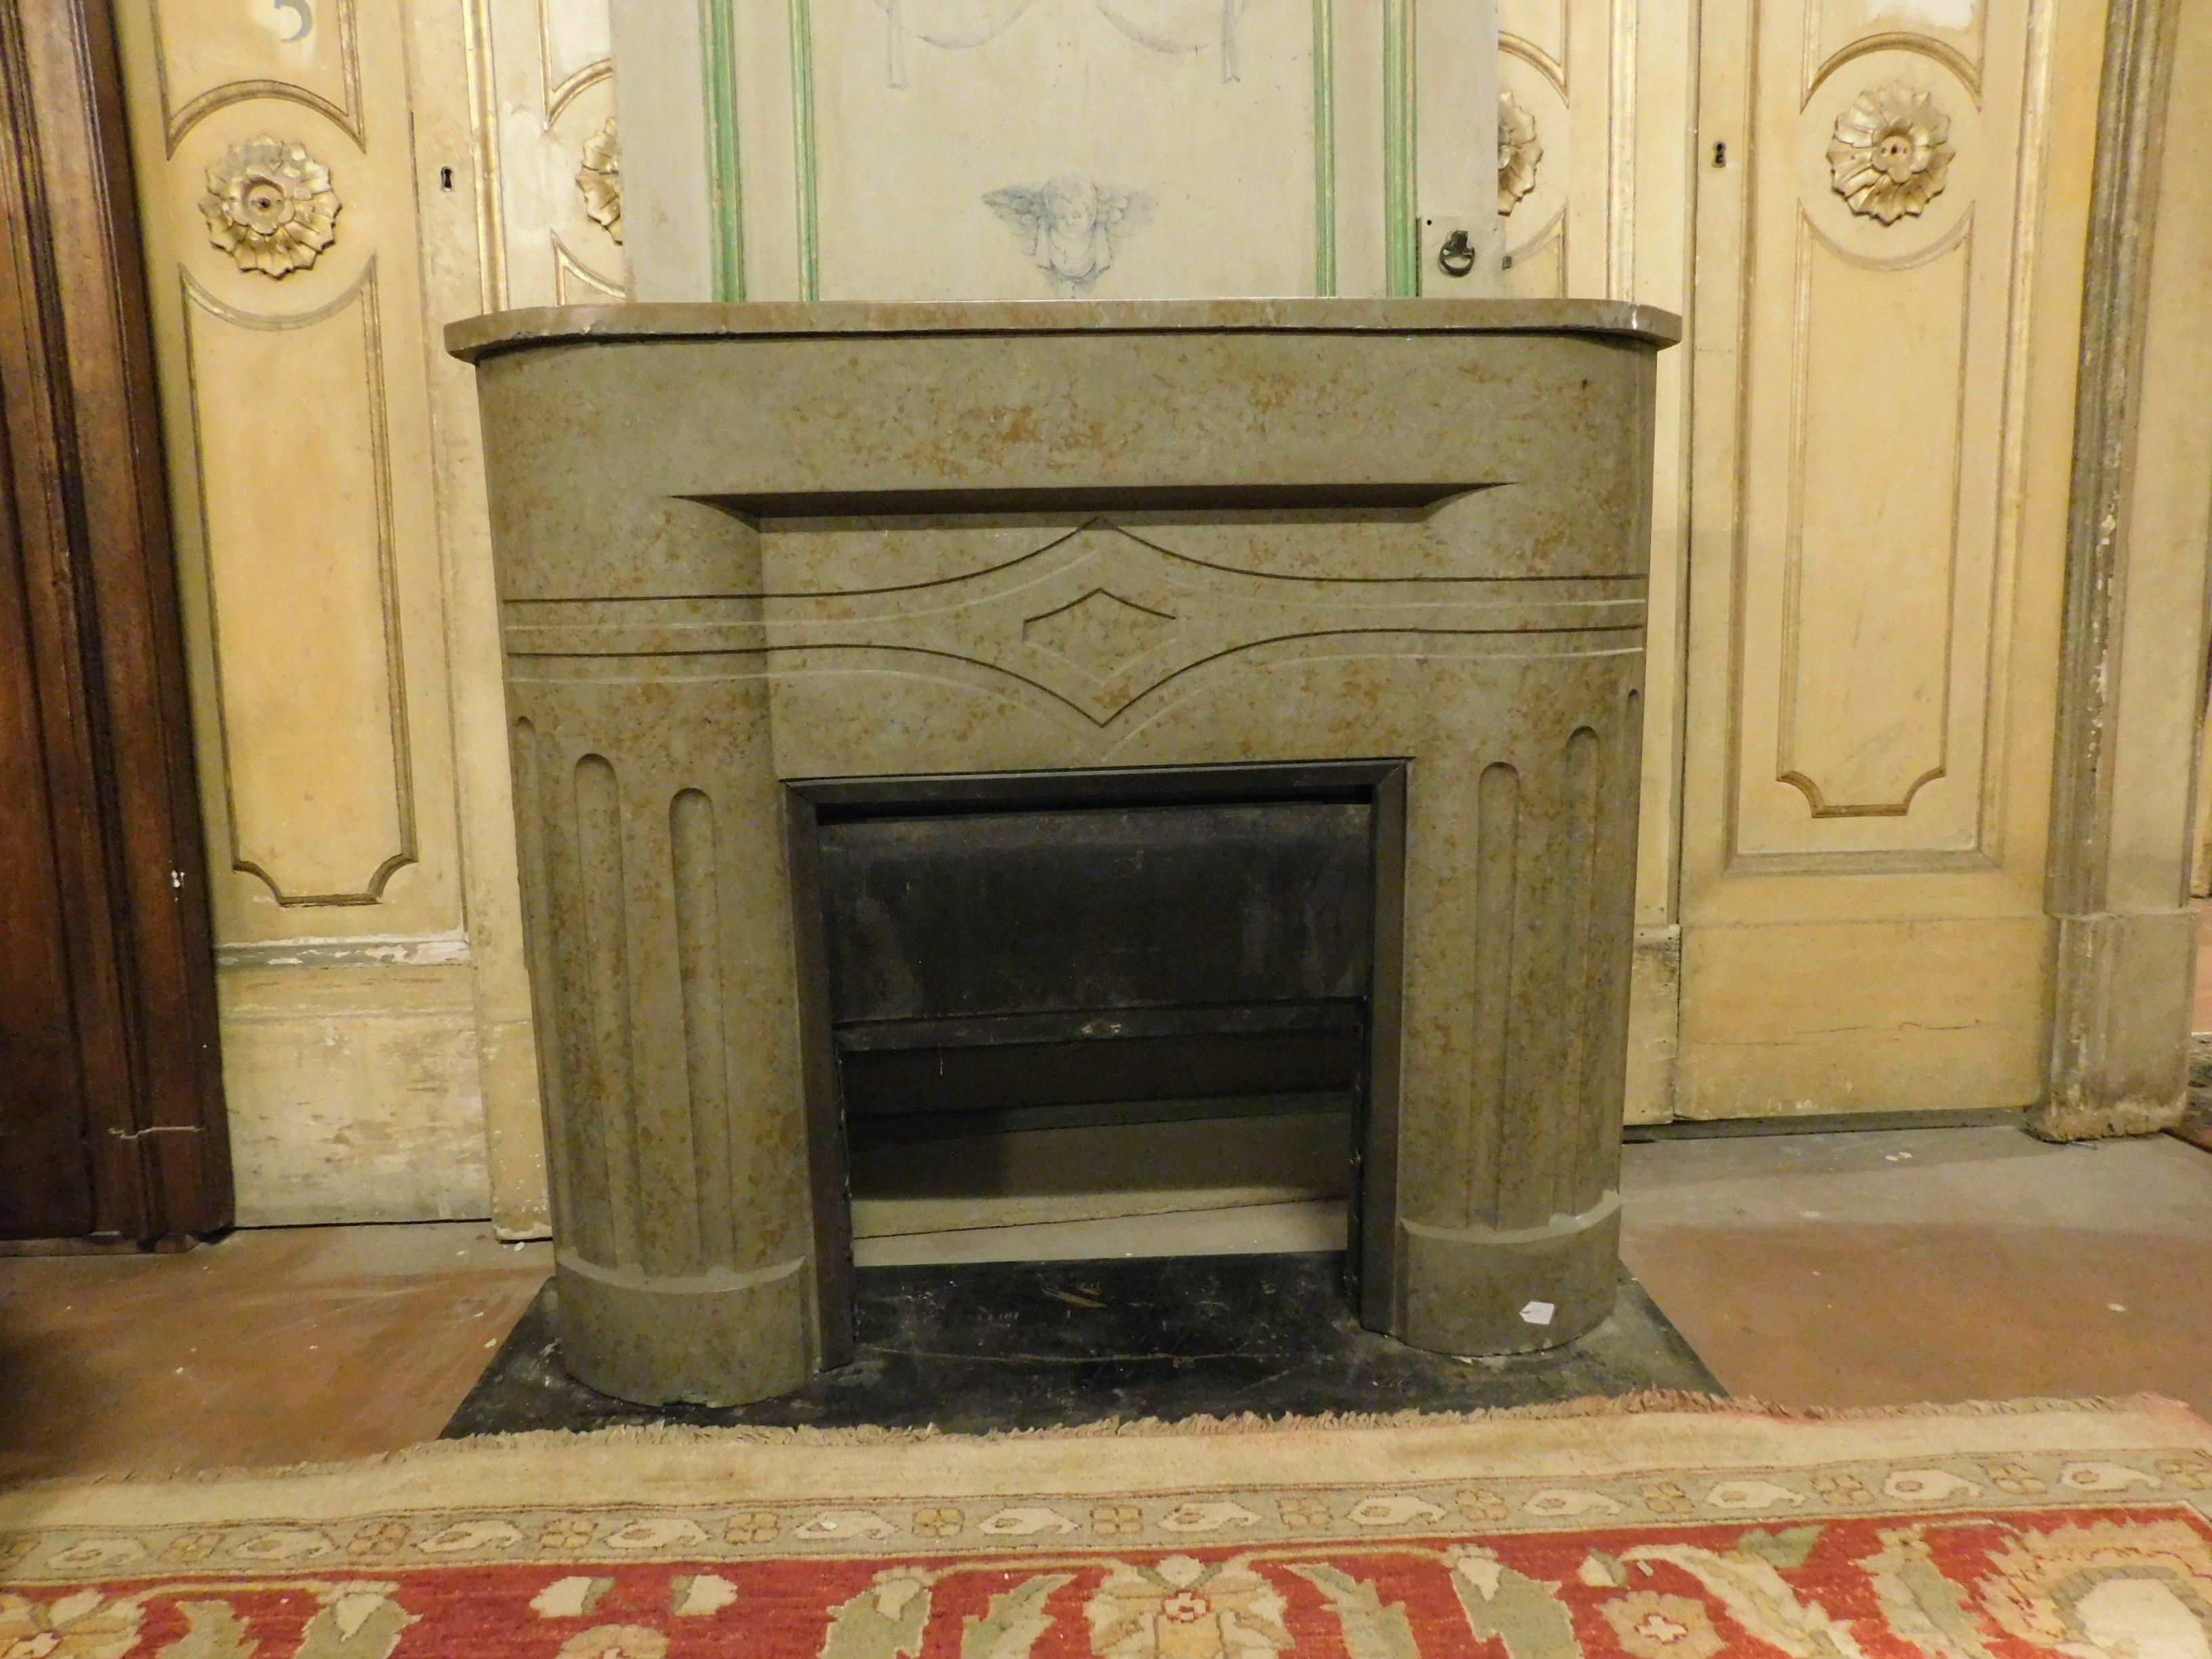 Vintage fireplace, ancient marble mantel (fireplace), carved in full Deco style, dove gray color, produced in 1920 in Italy.
Typical rounded and rounded shapes, impressive color and sense of hardness that fully reflects the era, however elegant and